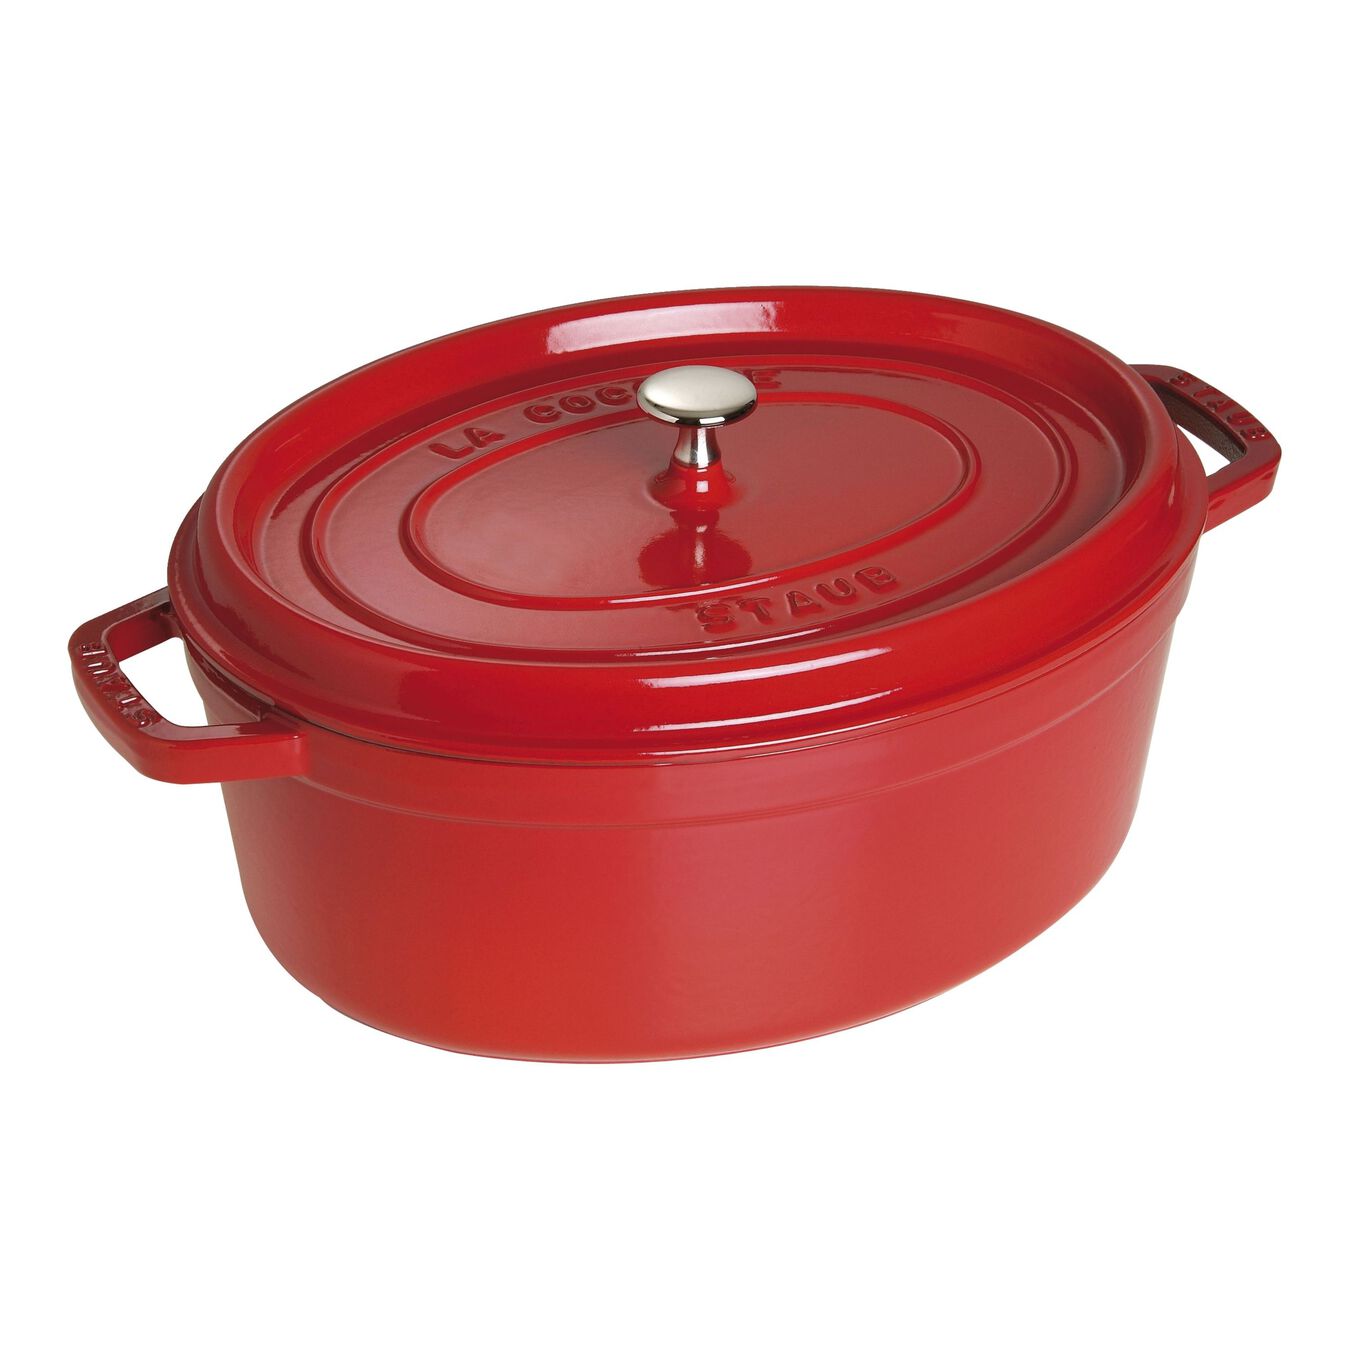 Cocotte 31 cm, oval, Kirsch-Rot, Gusseisen,,large 1